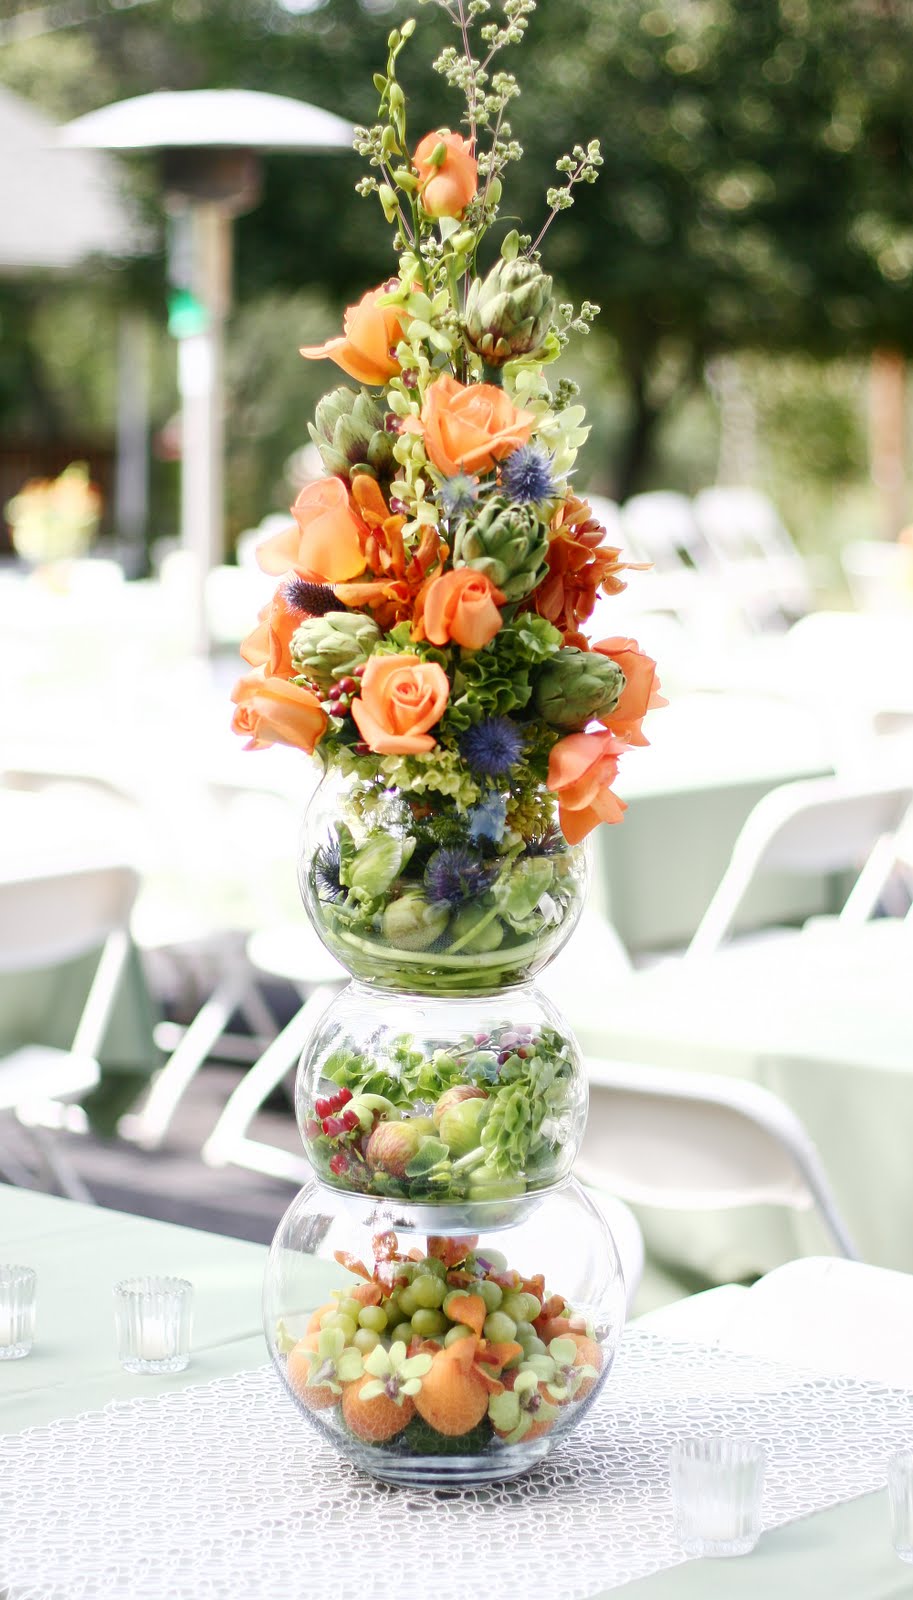 Blooms Blog: Fruit and flowers a lovely backyard wedding